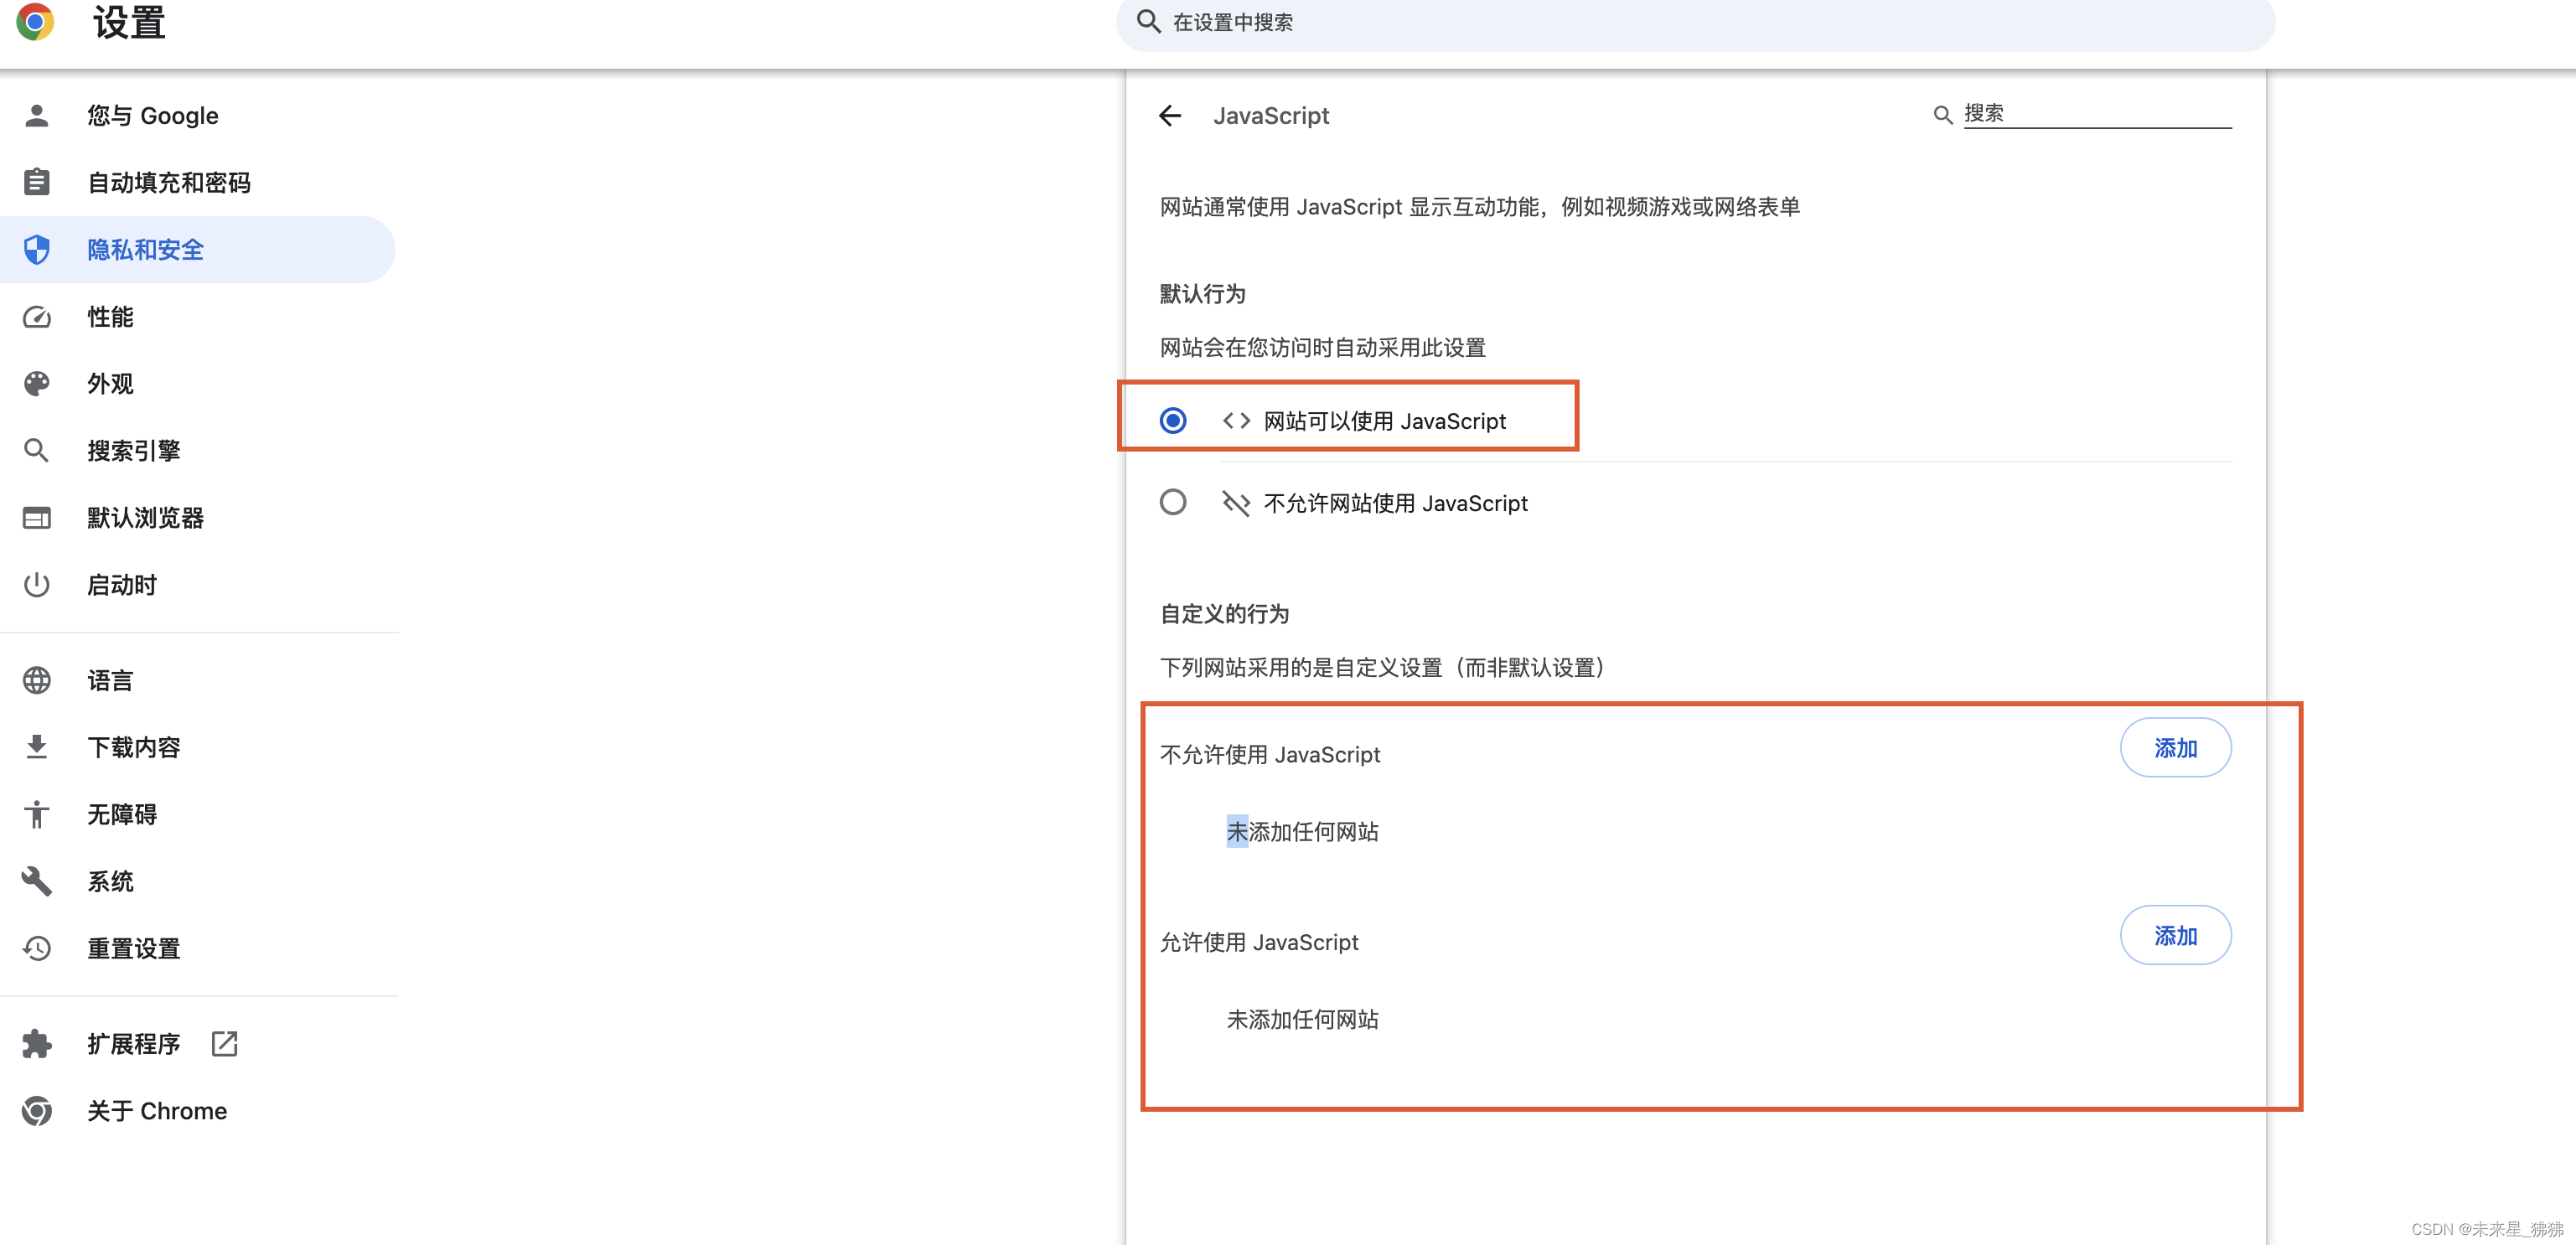 chrome 浏览器报错 This page will not function without javascript enabled